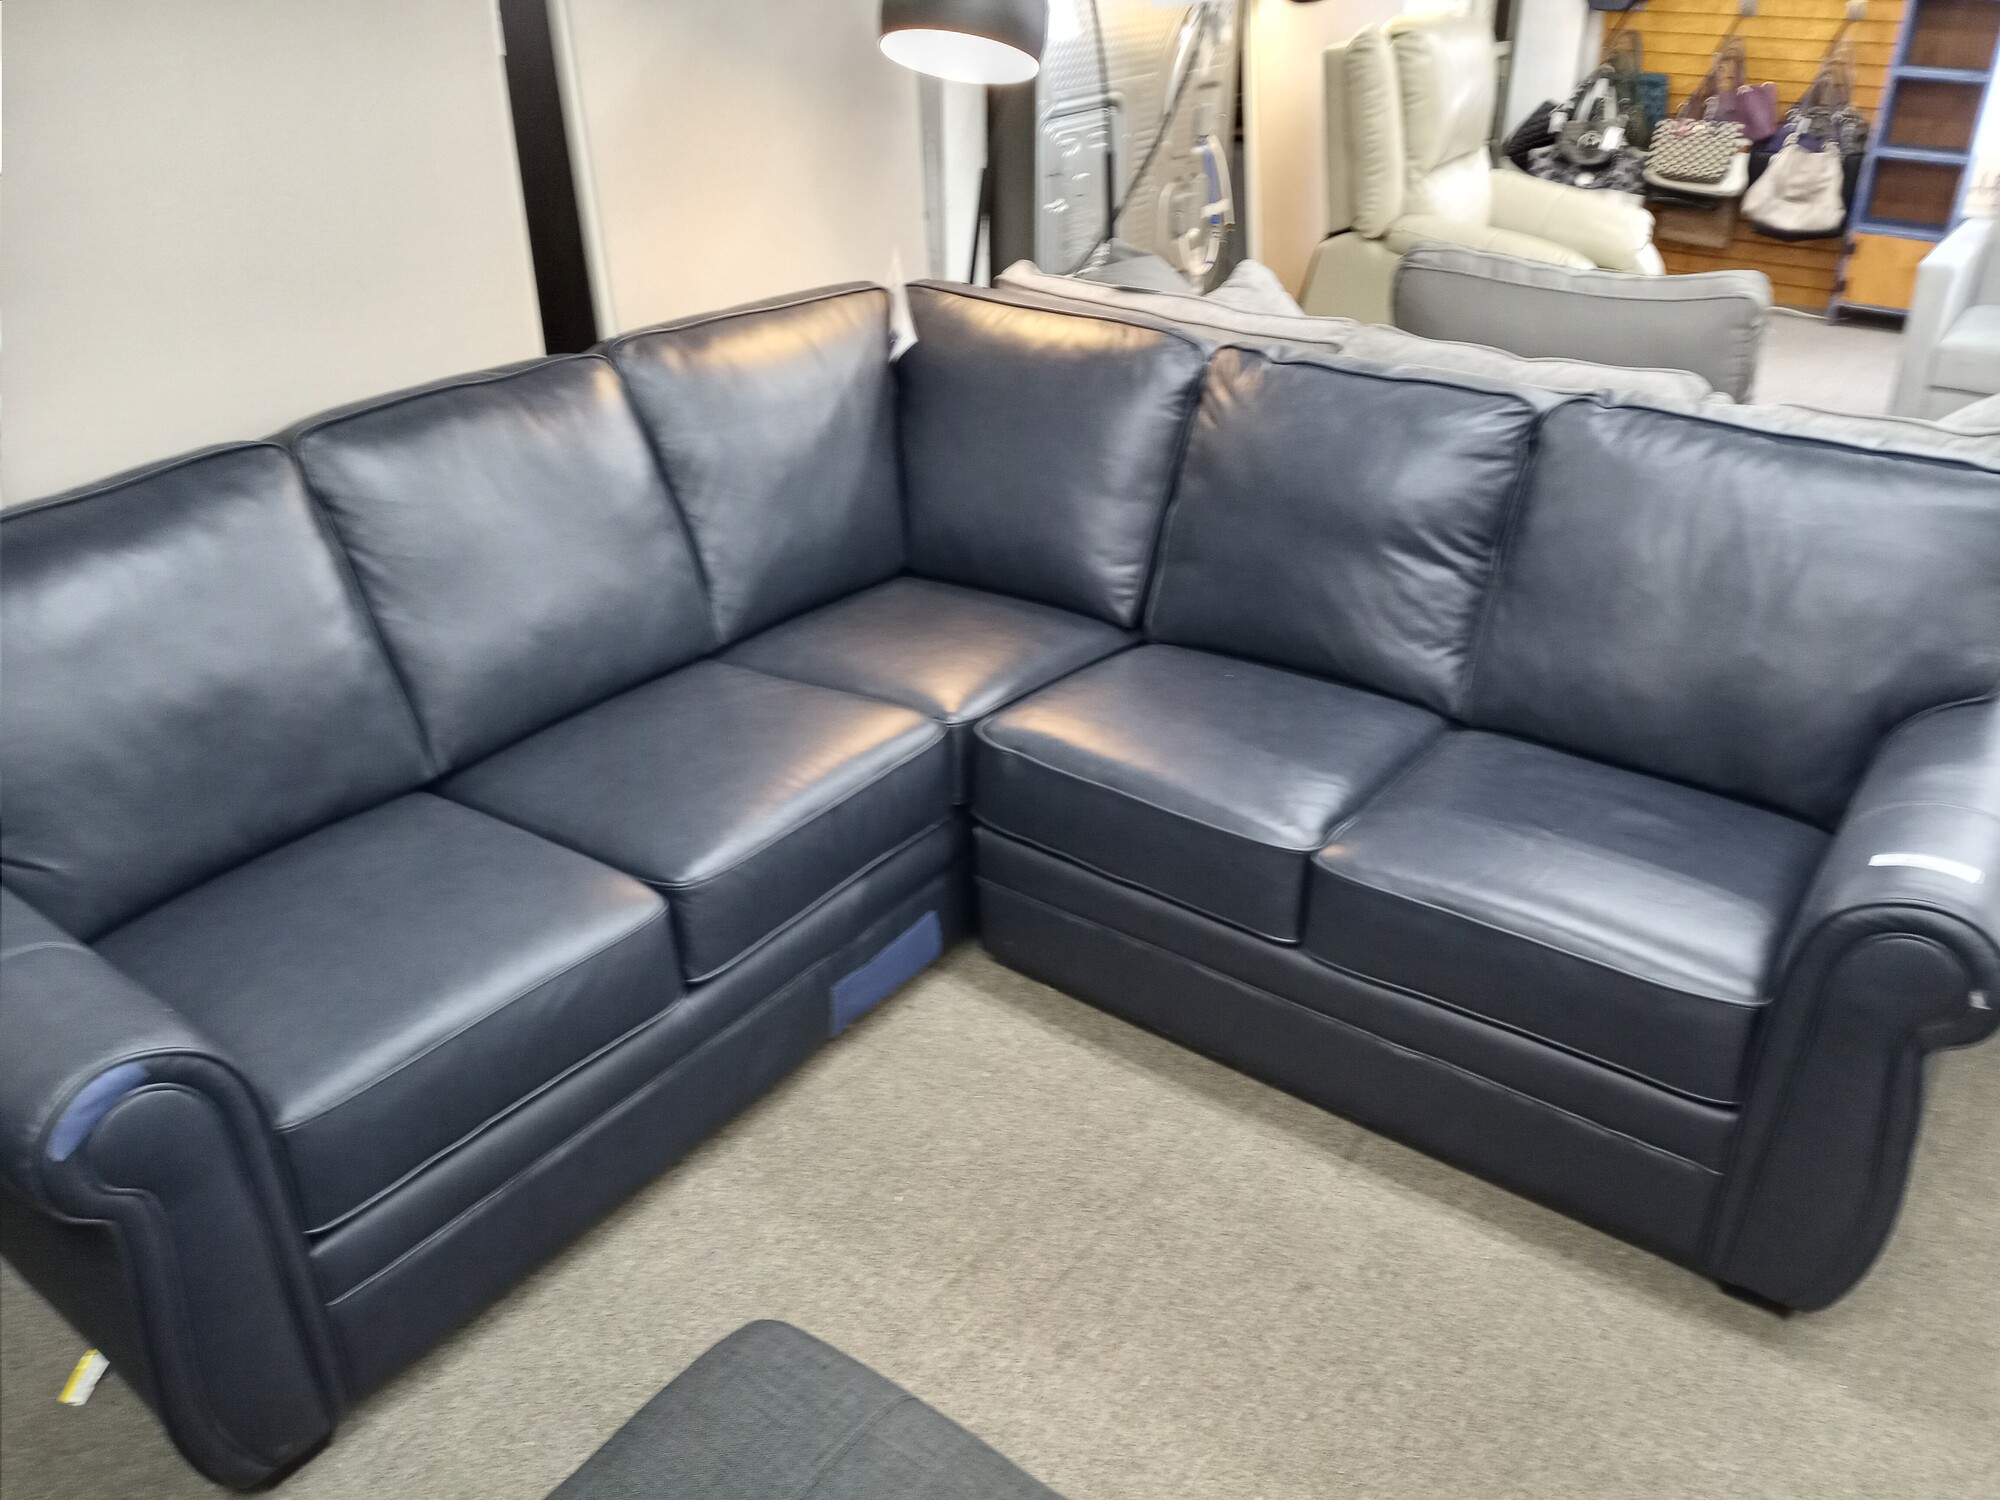 Blue Sectional Damage!!, Trucking damage lower frame and rips in material. Brand NEW